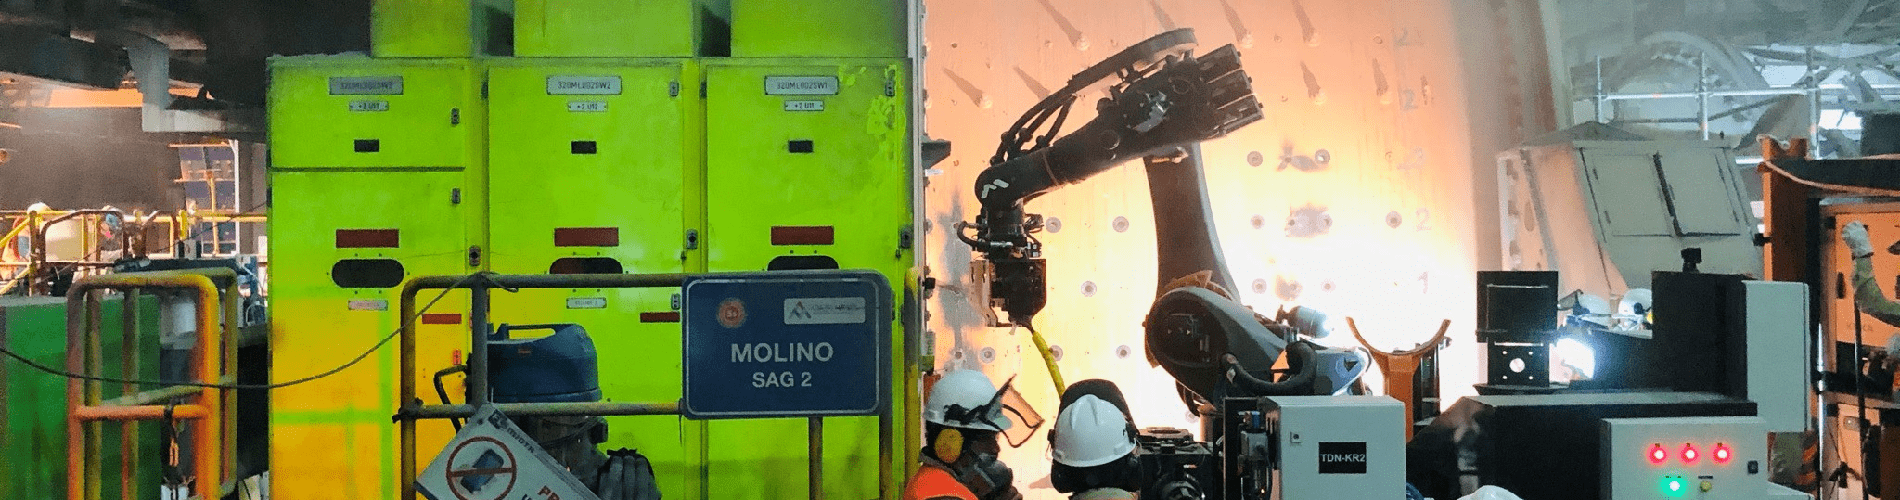 MIRS projects high demand for its robotic solution for mill liner changes